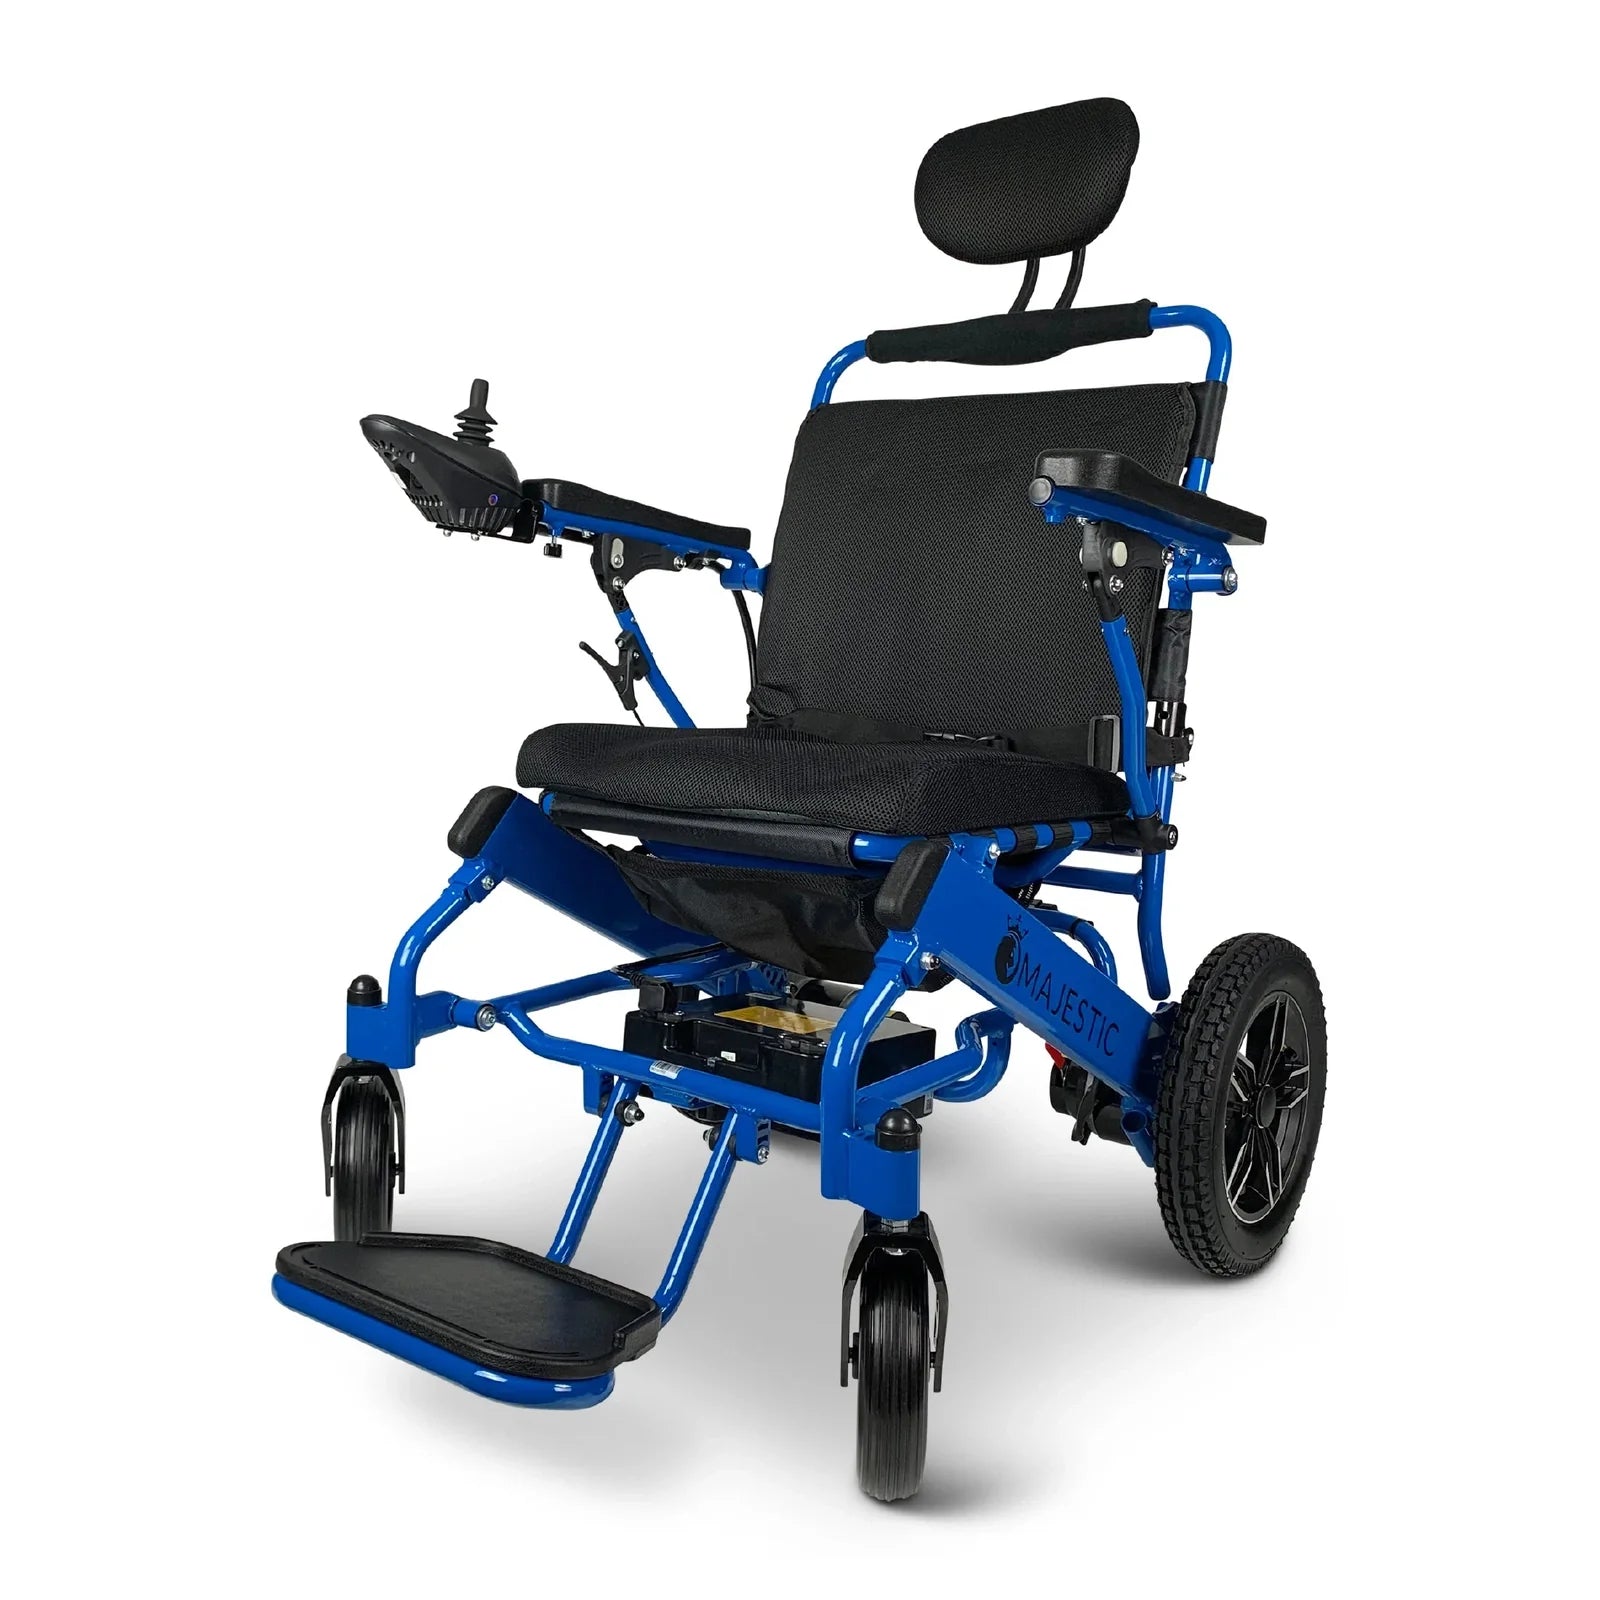 ComfyGO Majestic IQ-8000 Remote Controlled Lightweight Folding Electric Wheelchair Power Wheelchairs ComfyGO Blue Standard 10 Miles & 17.5" Seat Width